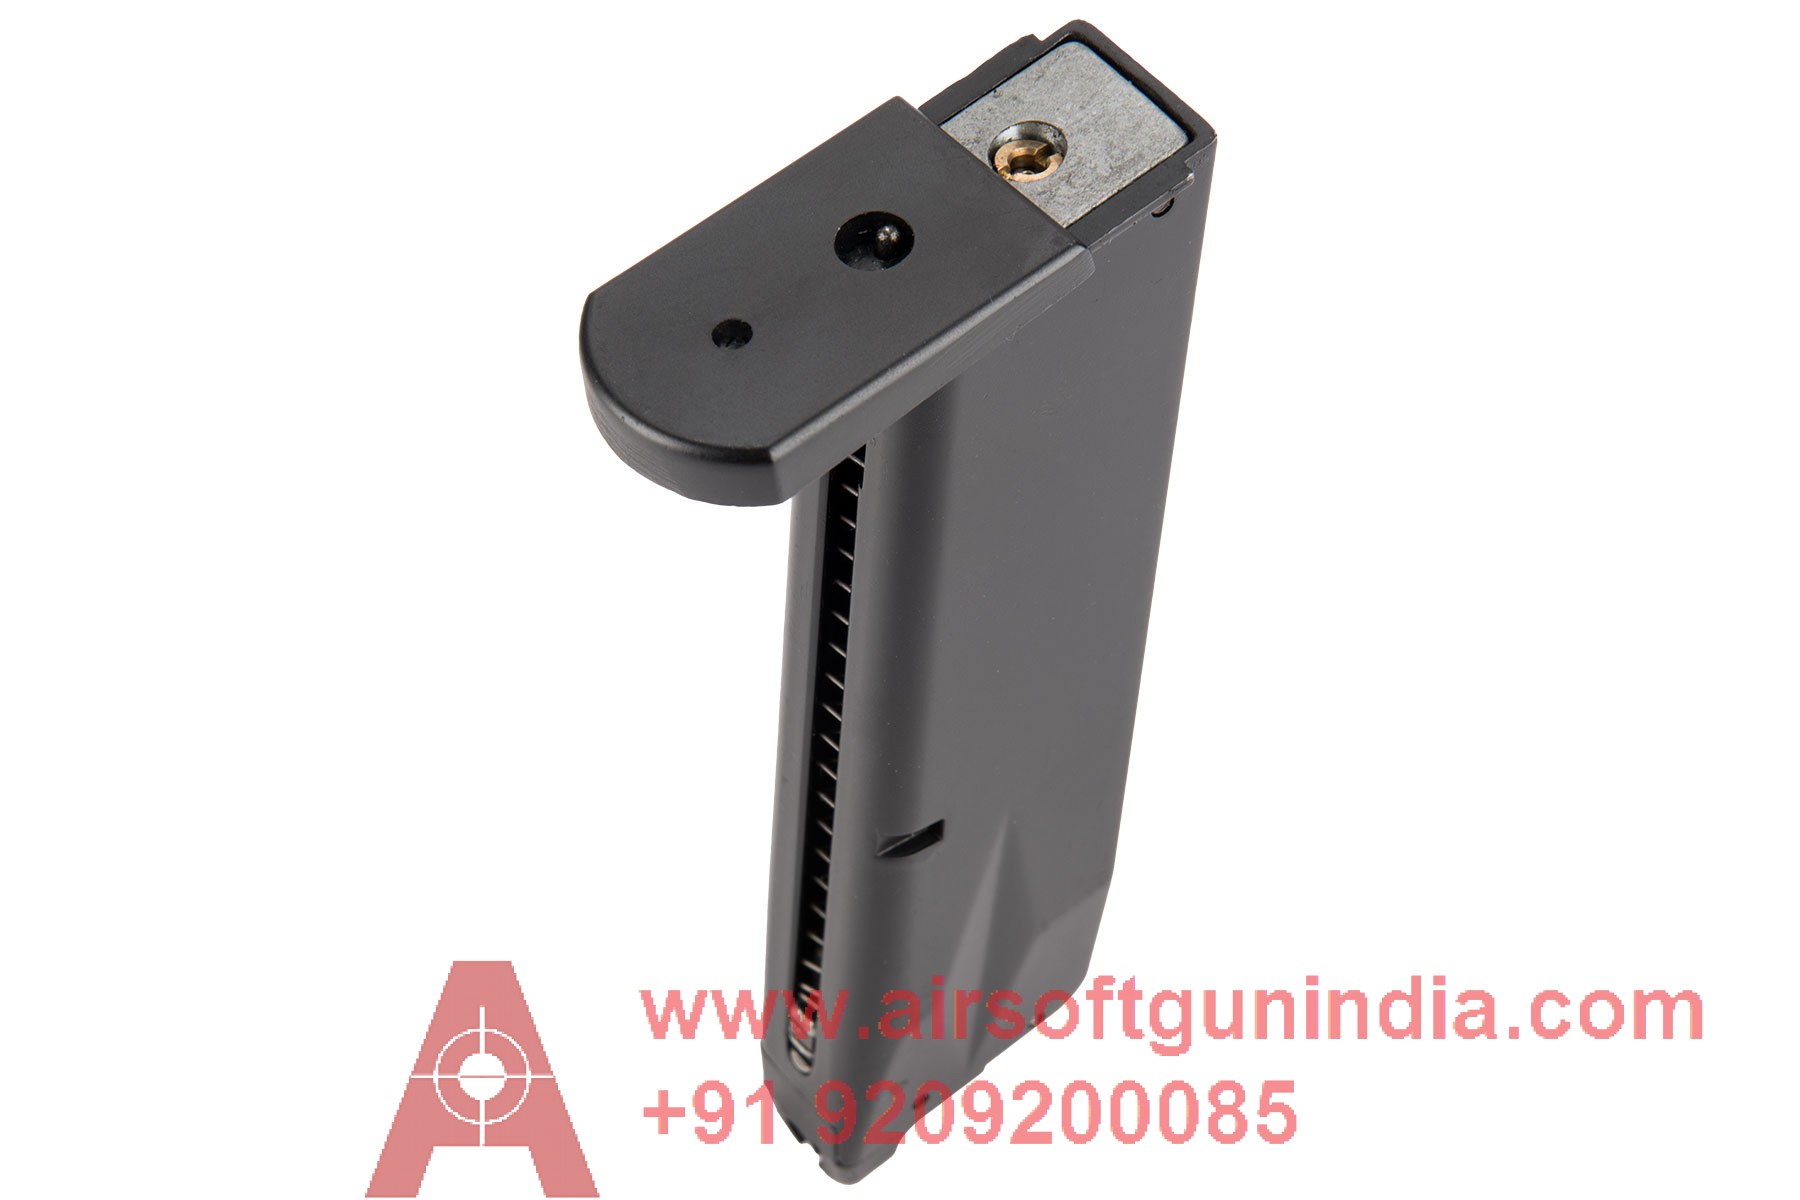 BELL Metal 24rd Magazine For Bell M9 GBB By Airsoft Gun India